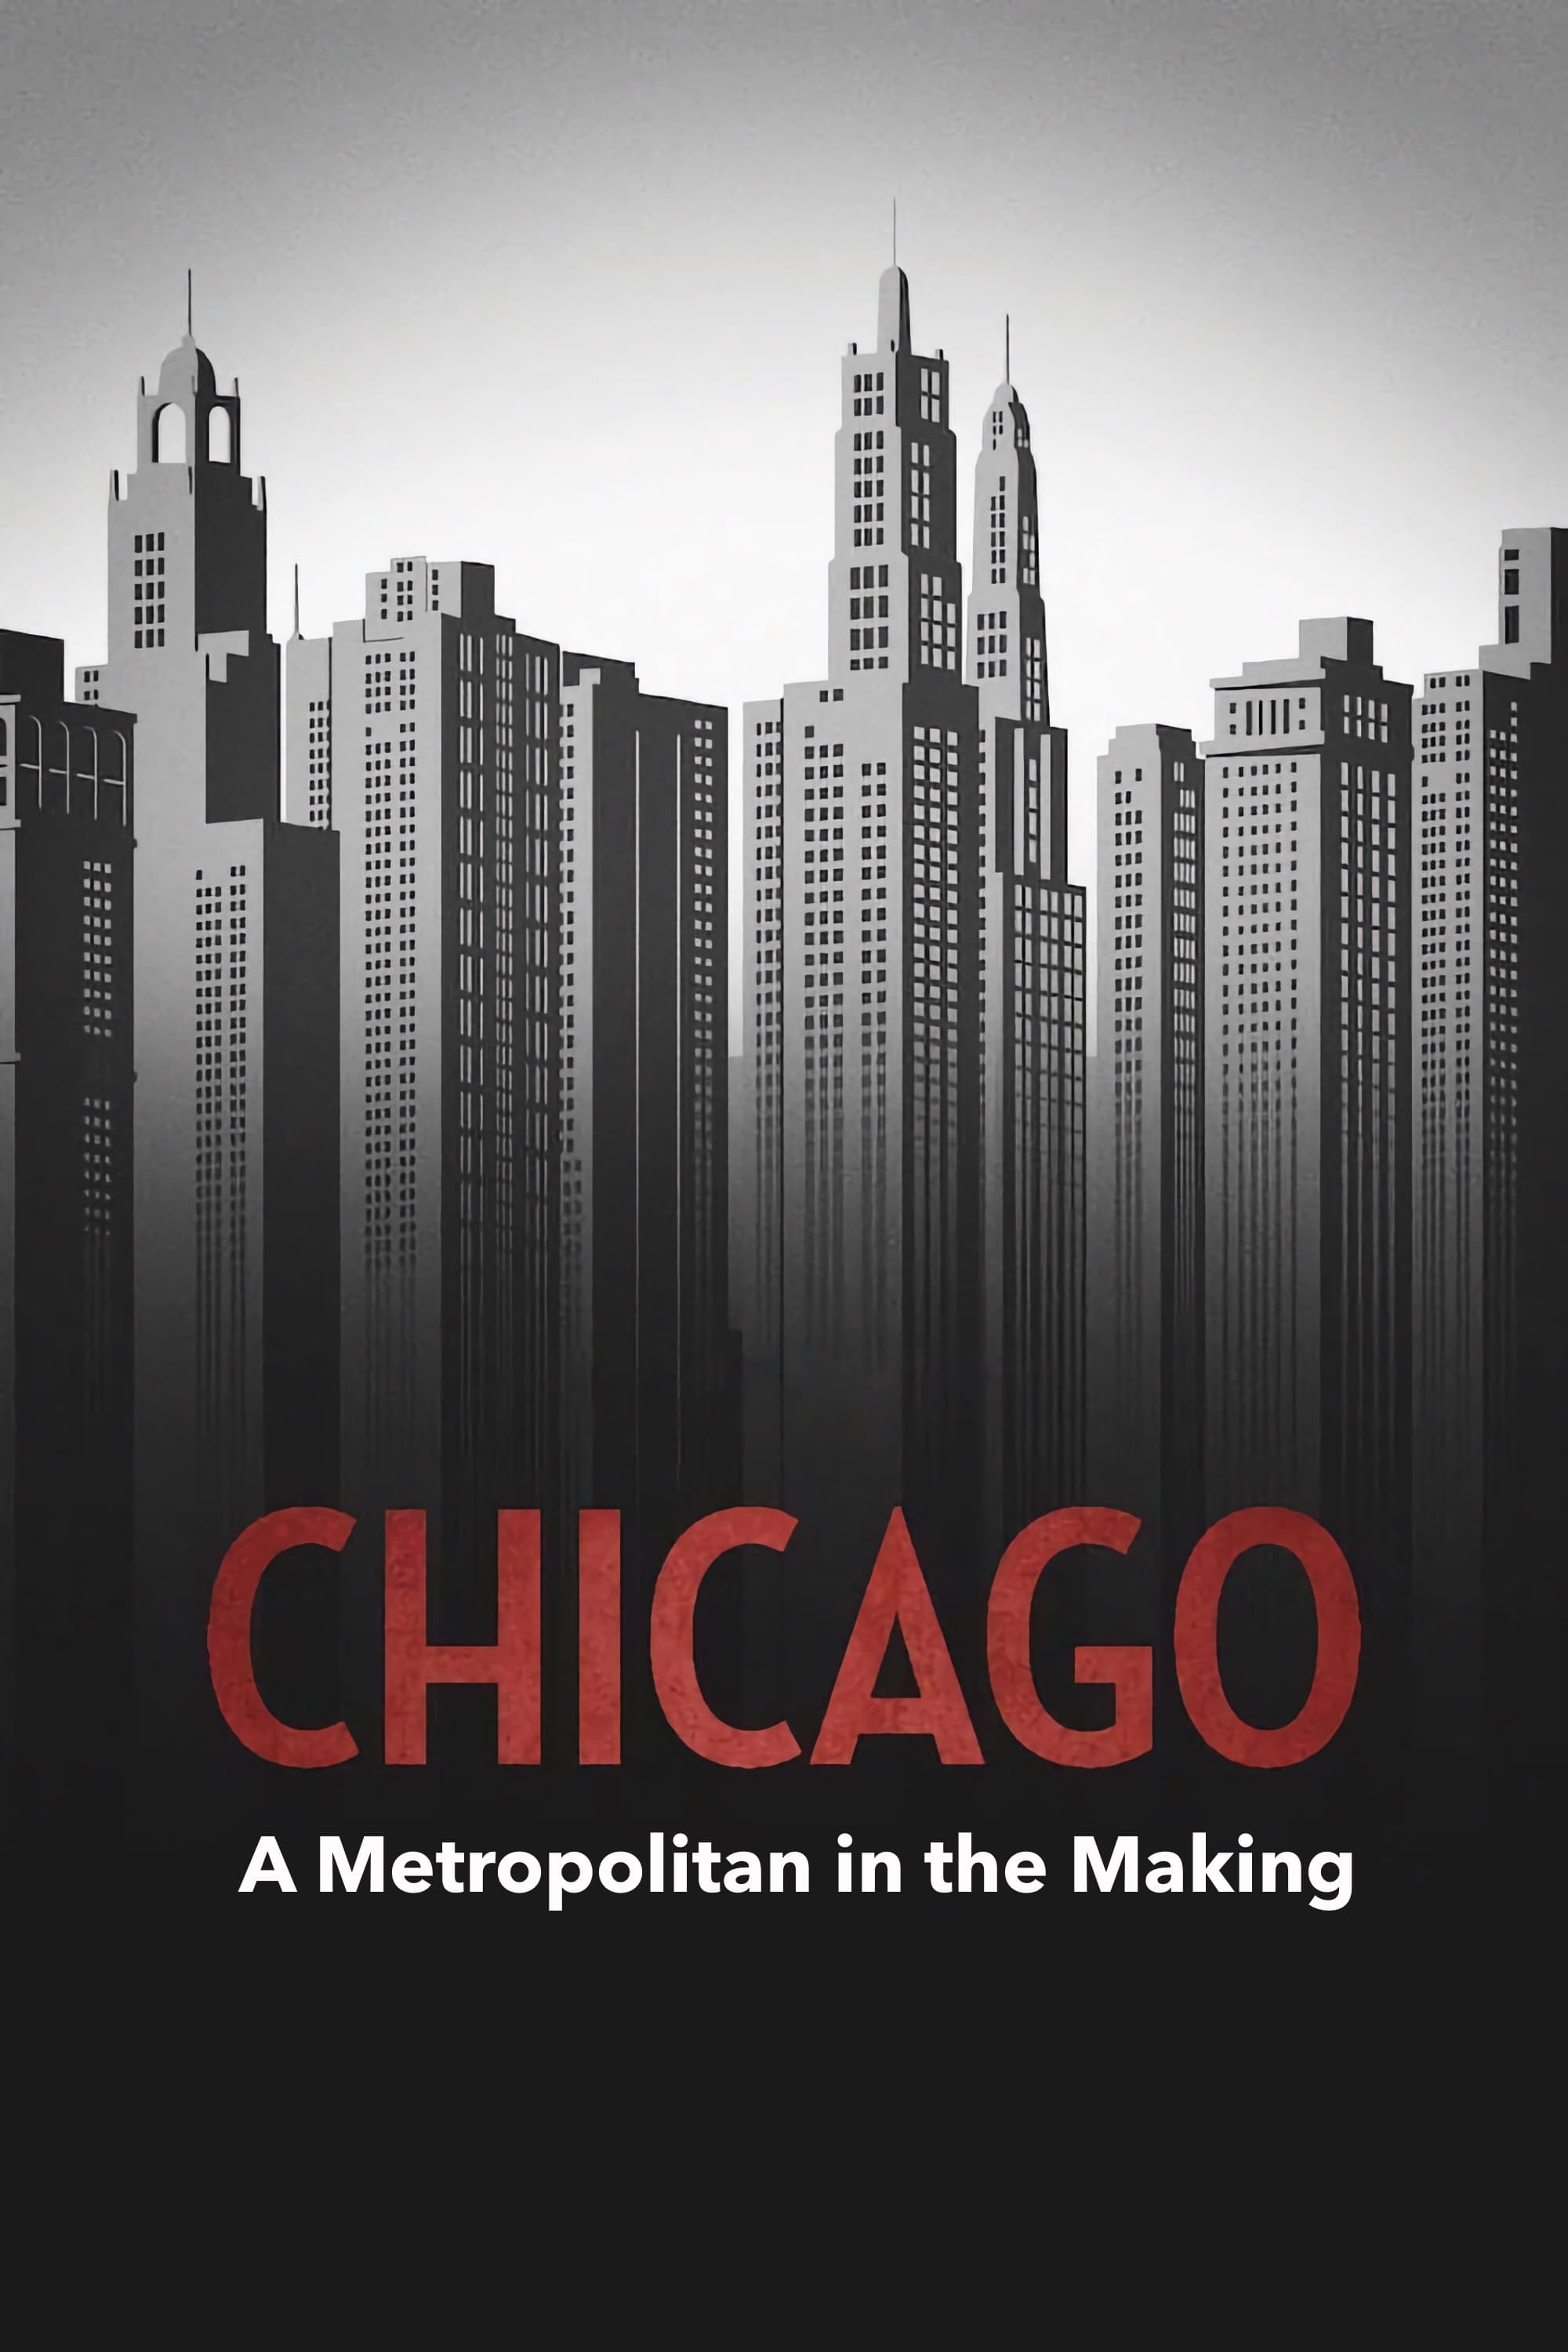 Chicago – A Metropolitan in the Making